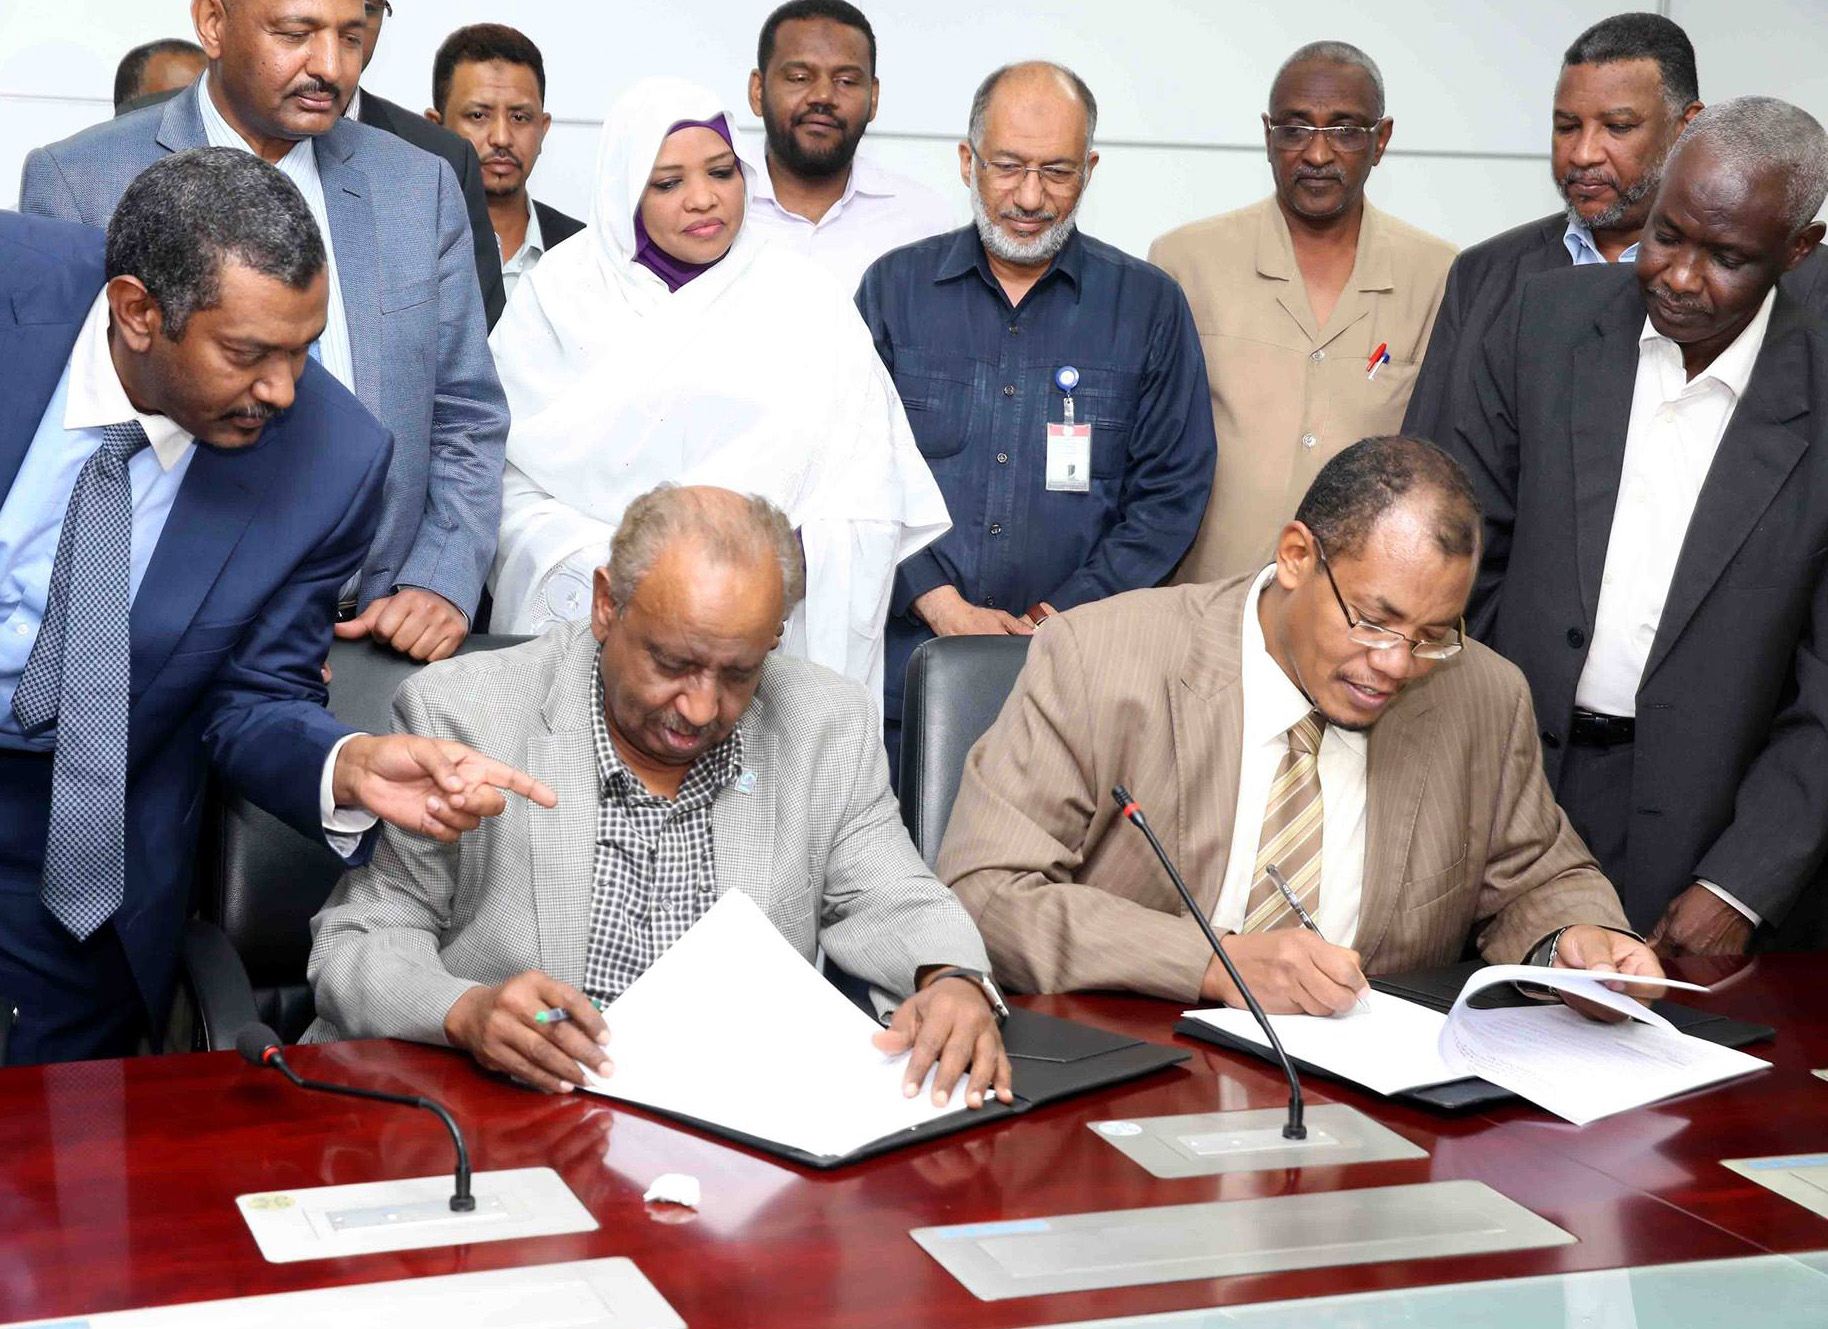 The deal was signed by Zain Sudan Managing Director and CEO Al-Fateh Orwah and Director of Sudan's National Telecommunication Corporation (NTC) Yahya Abdullah